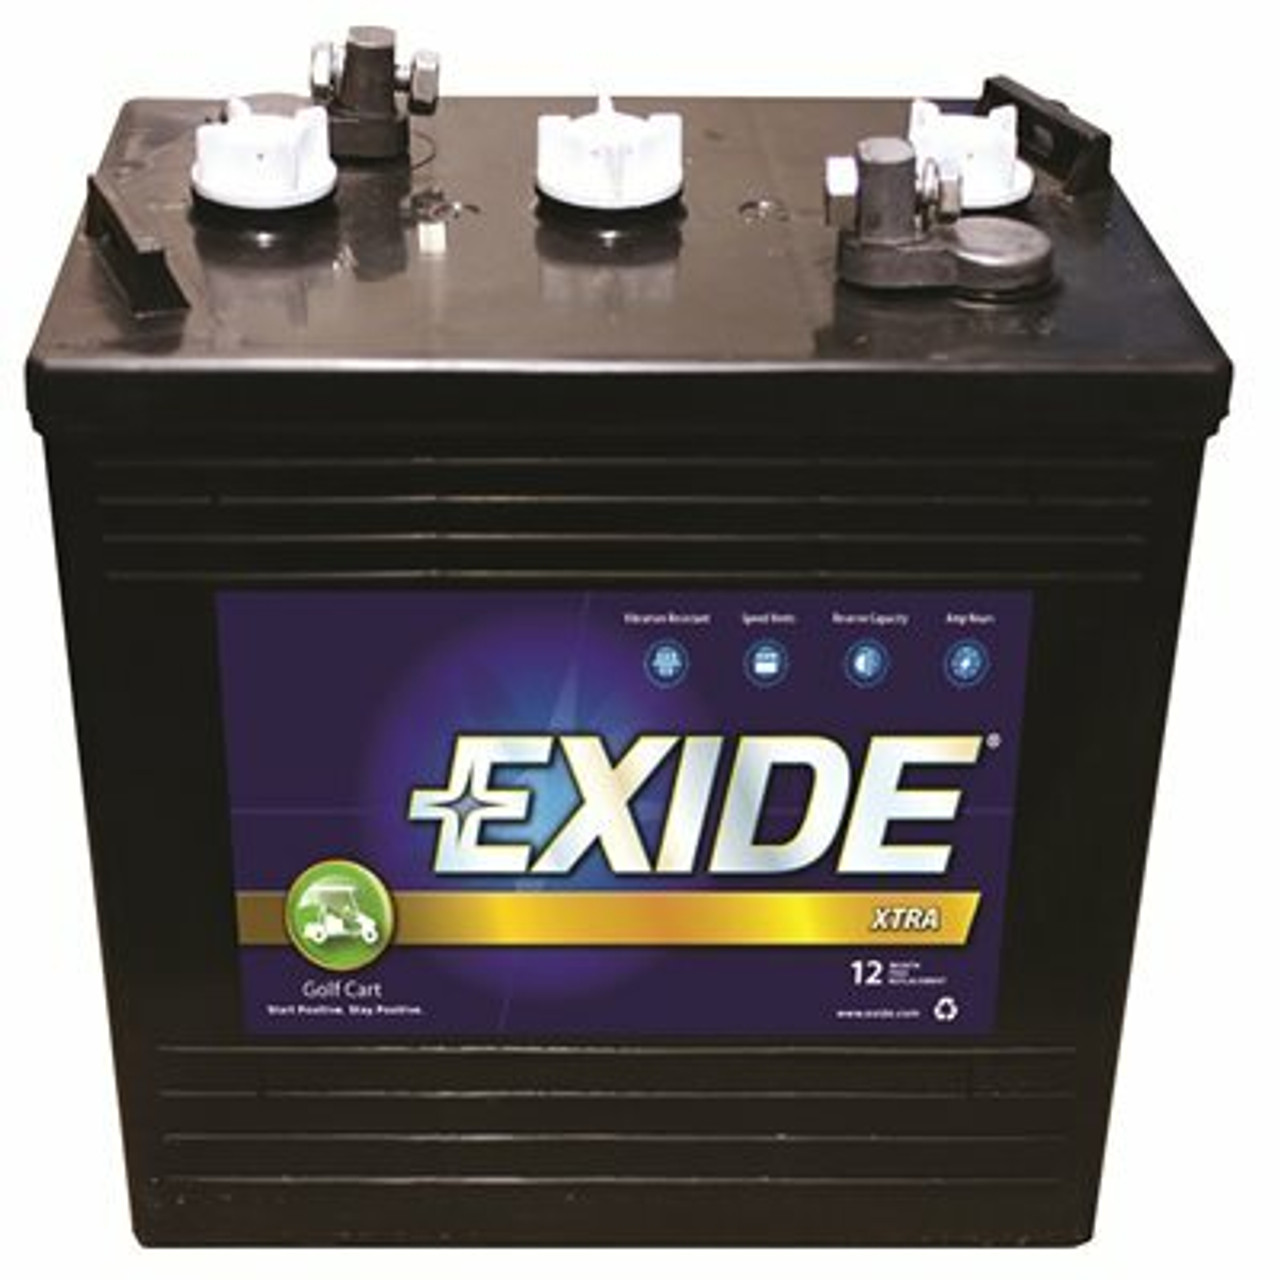 Exide Xtra 6-Volt Lead Acid 3-Cell Group Size Cold Cranking Amps Battery (Bci) (1-Pack)